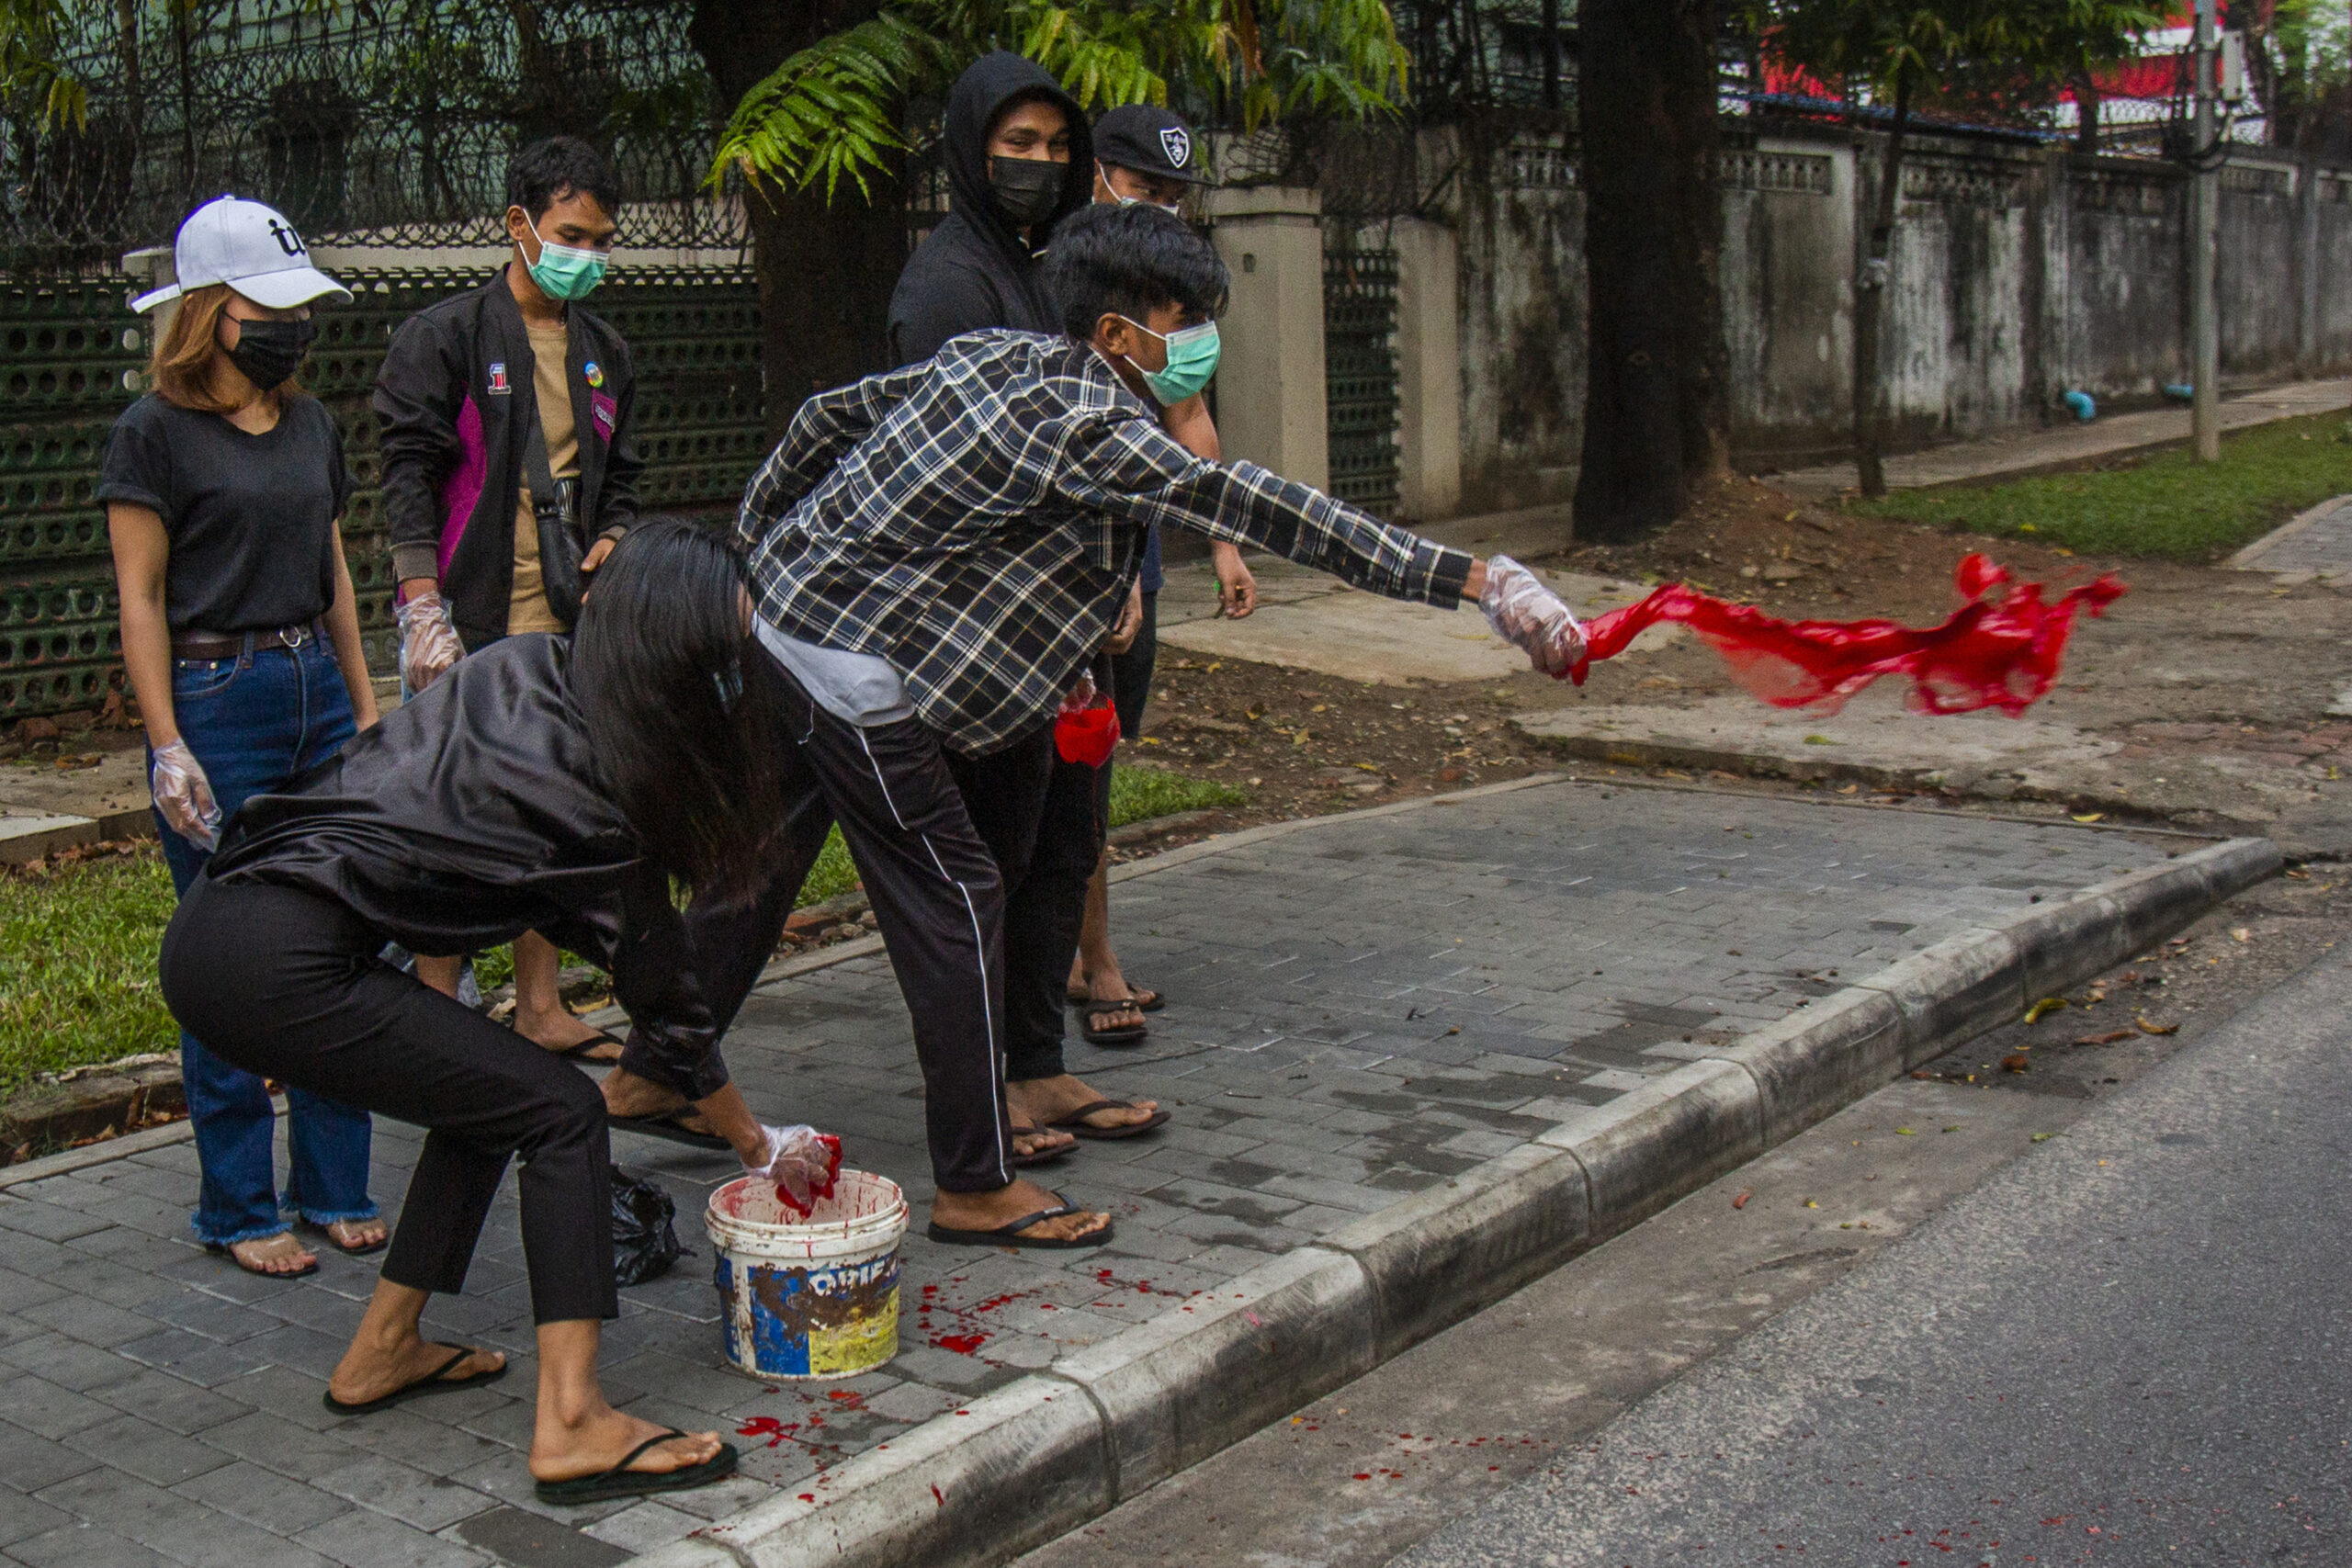 Anti-coup protesters throw red paint on a street during a demonstration in Yangon, Myanmar, Tuesday April 6, 2021. Photo: AP